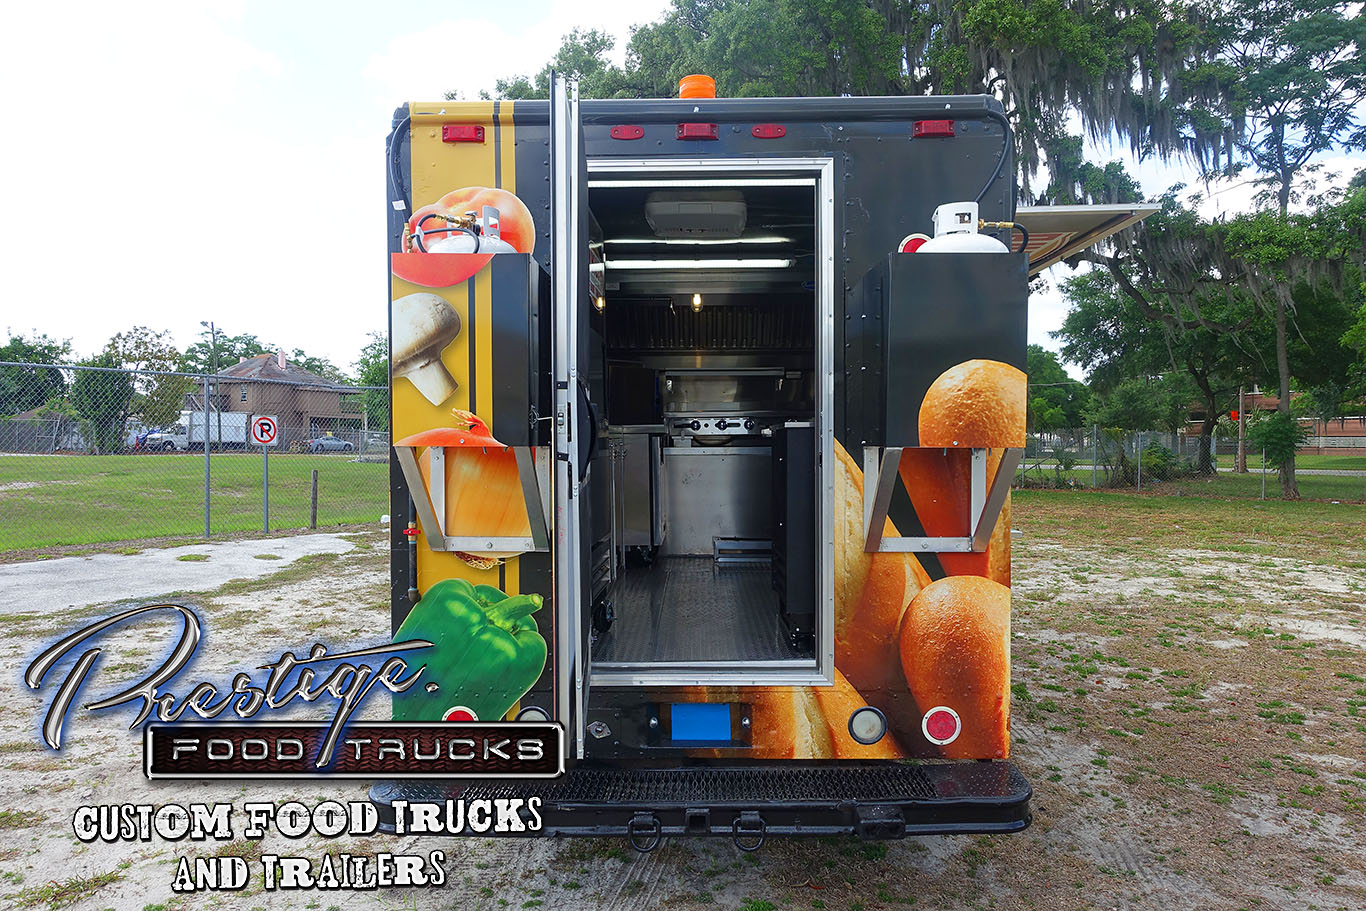 rear view of black food truck with rear door open to reveal inside kitchen